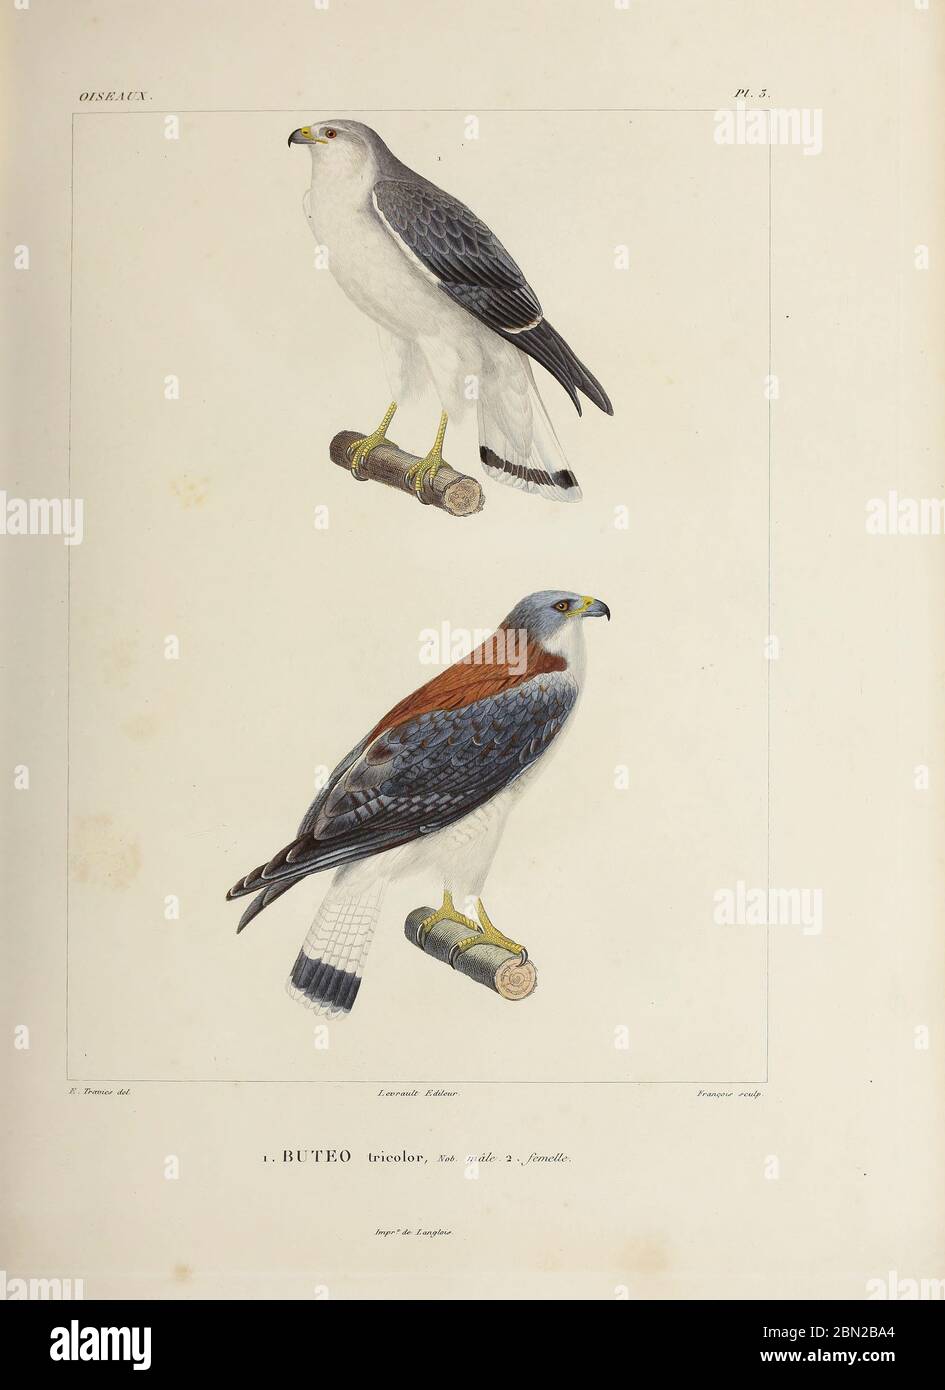 hand coloured sketch of Variable Hawk (Buteo polyosoma polyosoma [Here as Buteo tricolor]) Top: Male bottom: Female From the book 'Voyage dans l'Amérique Méridionale' [Journey to South America: (Brazil, the eastern republic of Uruguay, the Argentine Republic, Patagonia, the republic of Chile, the republic of Bolivia, the republic of Peru), executed during the years 1826 - 1833] 4th volume Part 3 By: Orbigny, Alcide Dessalines d', d'Orbigny, 1802-1857; Montagne, Jean François Camille, 1784-1866; Martius, Karl Friedrich Philipp von, 1794-1868 Published Paris :Chez Pitois-Levrault et c.e ... ;18 Stock Photo